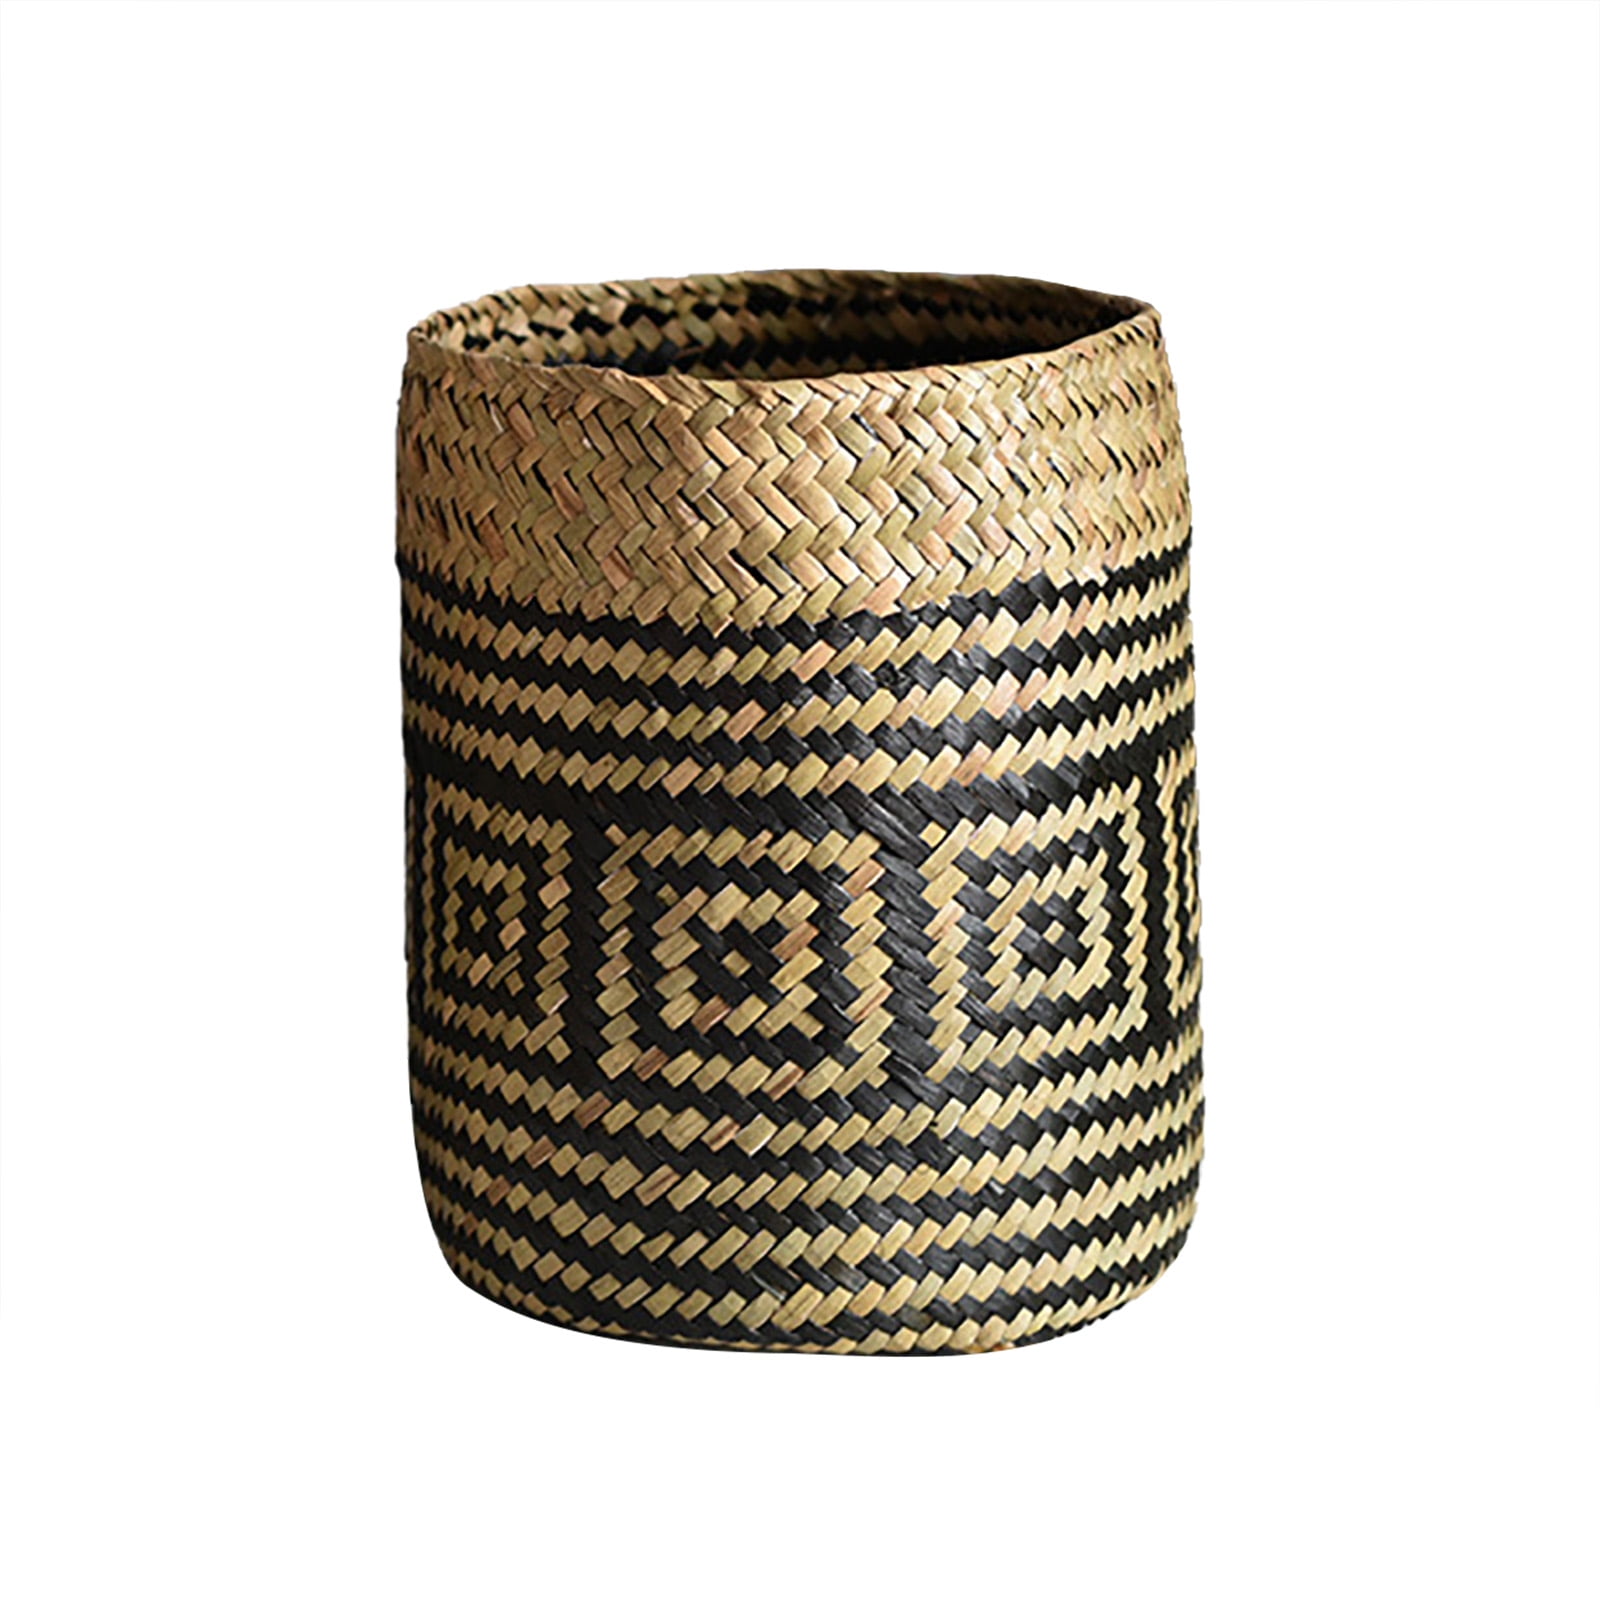 Handmade Natural Traditional Brown Woven Wicker Cane Bamboo Basket Fruits Flower 